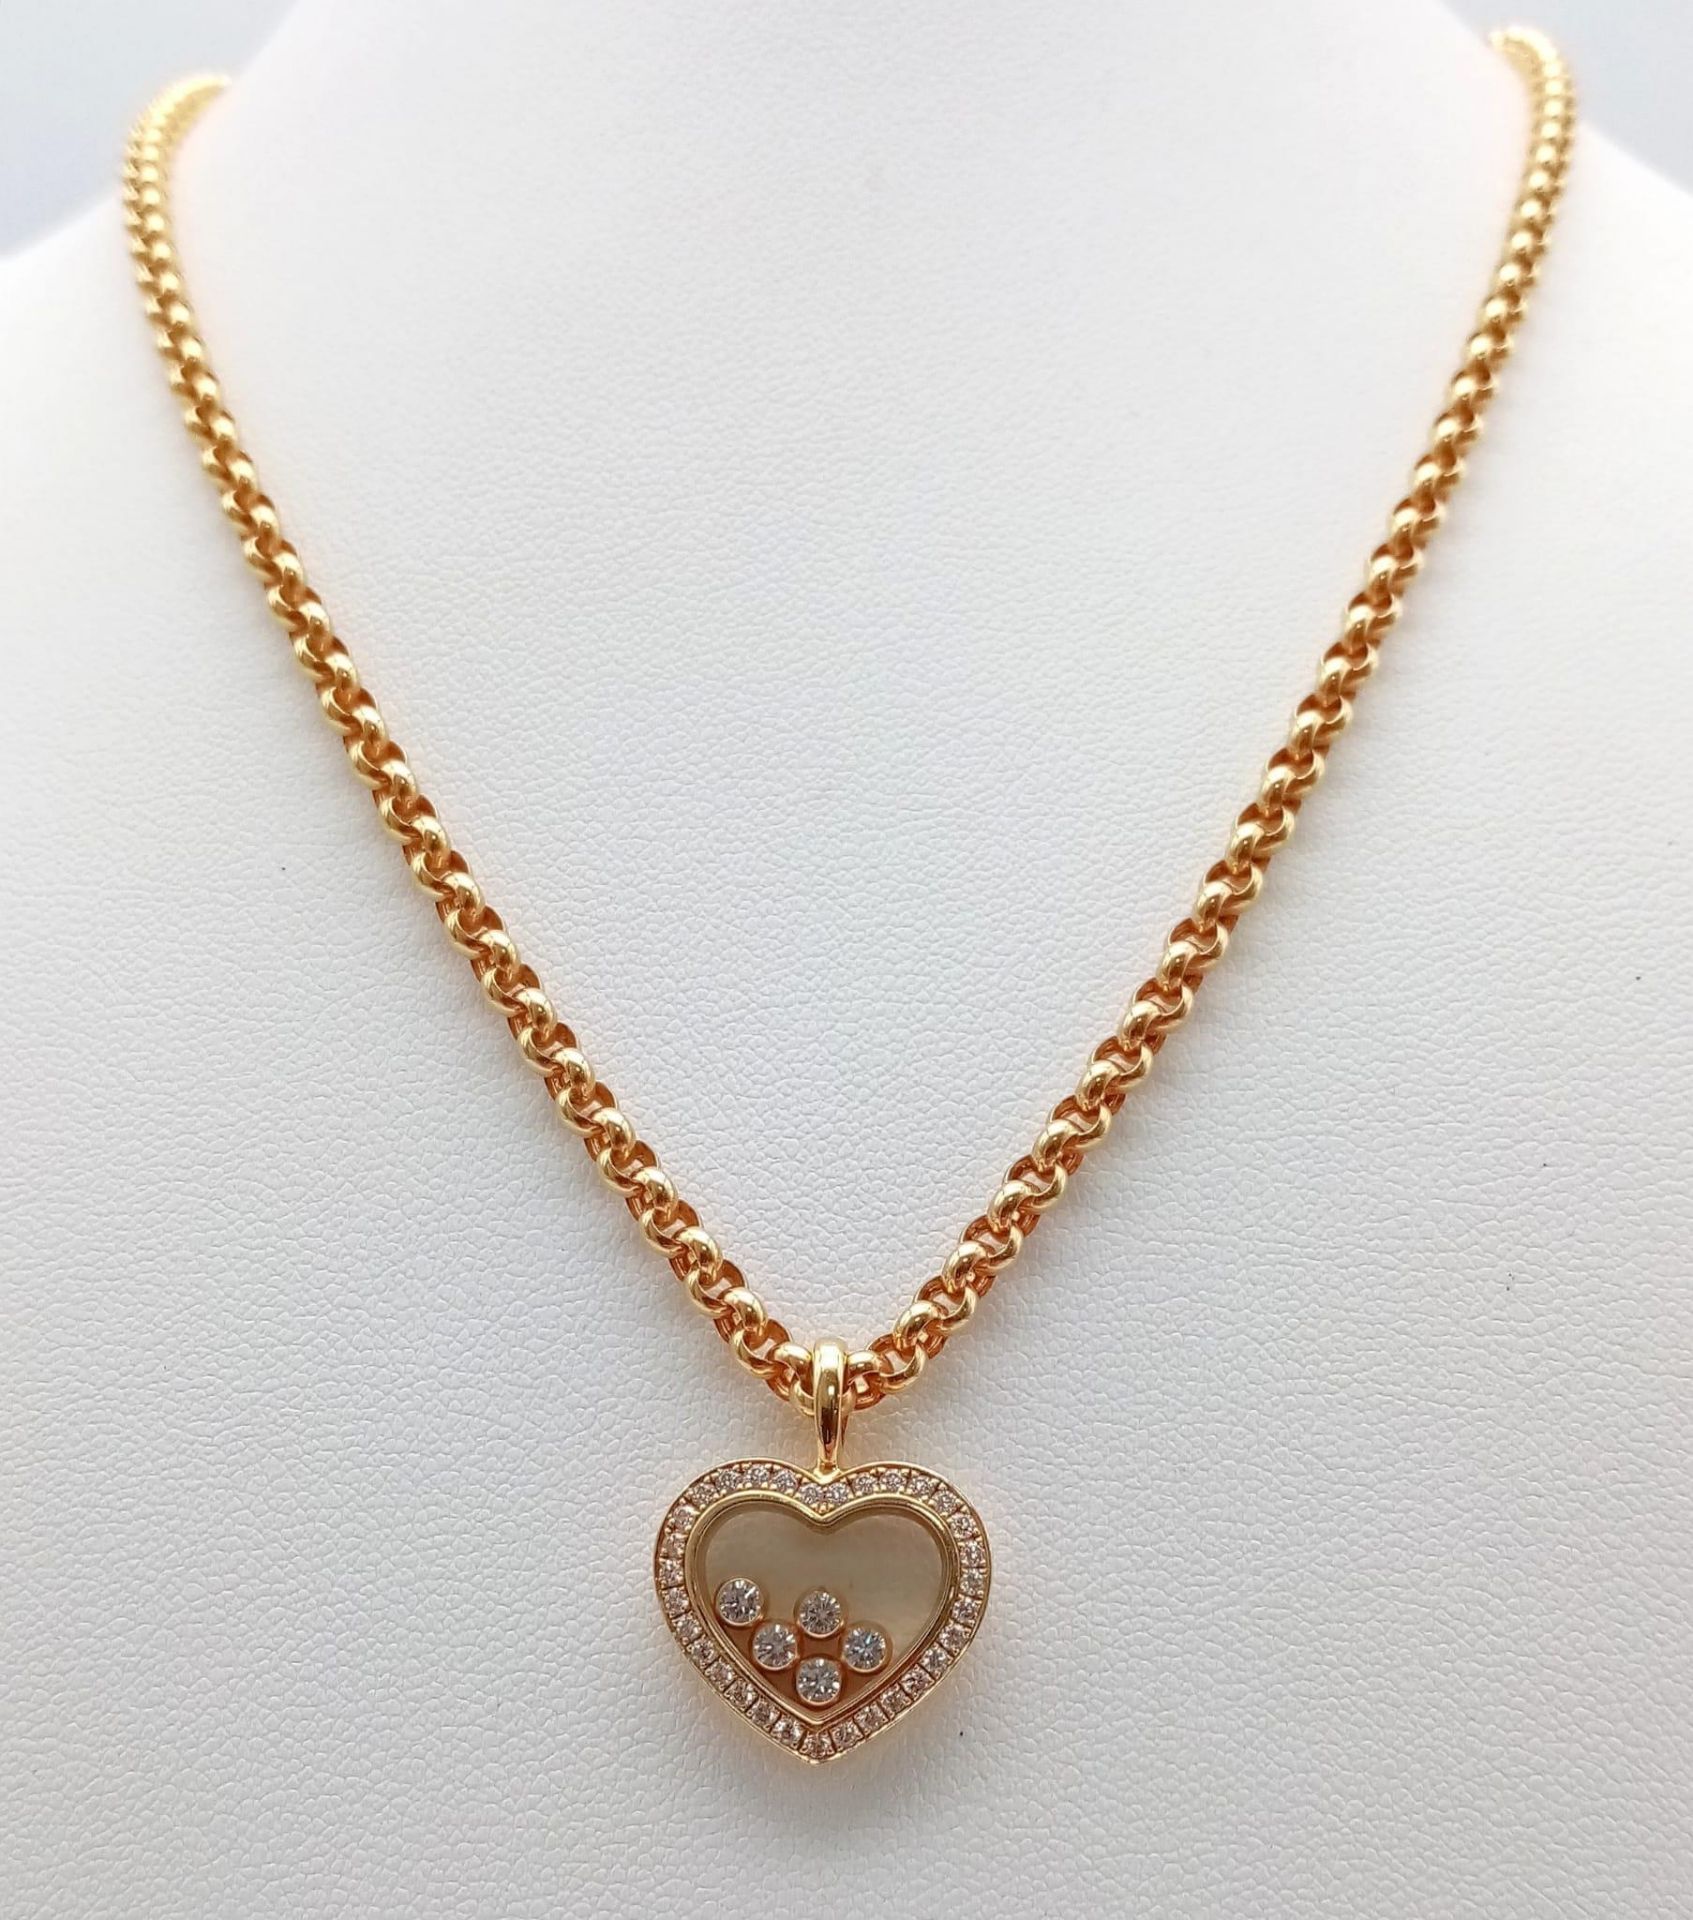 A Chopard 18K Yellow Gold and Floating Diamond Heart Pendant on an 18K Yellow Gold Belcher Link - Image 4 of 7